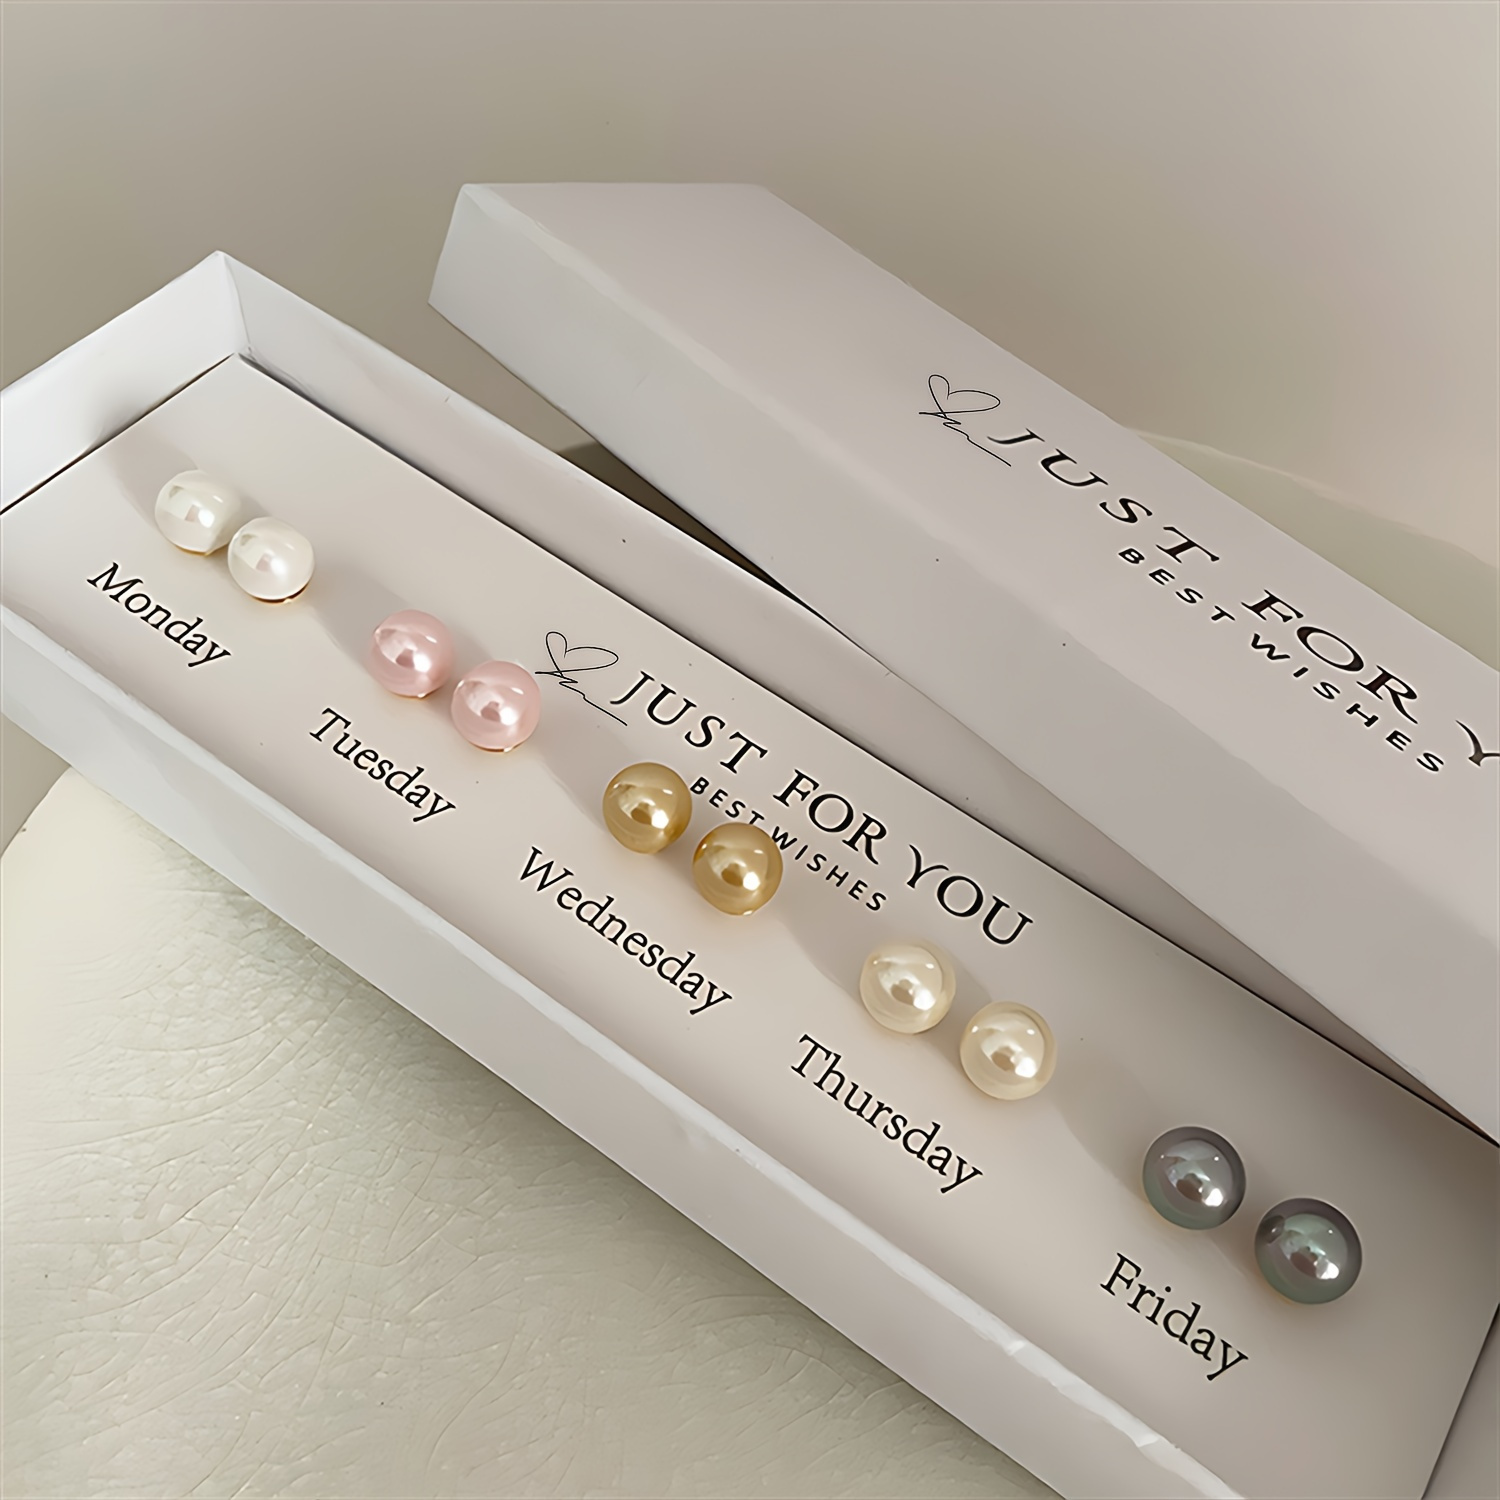 

Exquisite 10 Pcs Set Of Delicate Colorful Imitation Pearl Design Stud Earrings Vintage Elegant Style For Women Gift With Gift Box